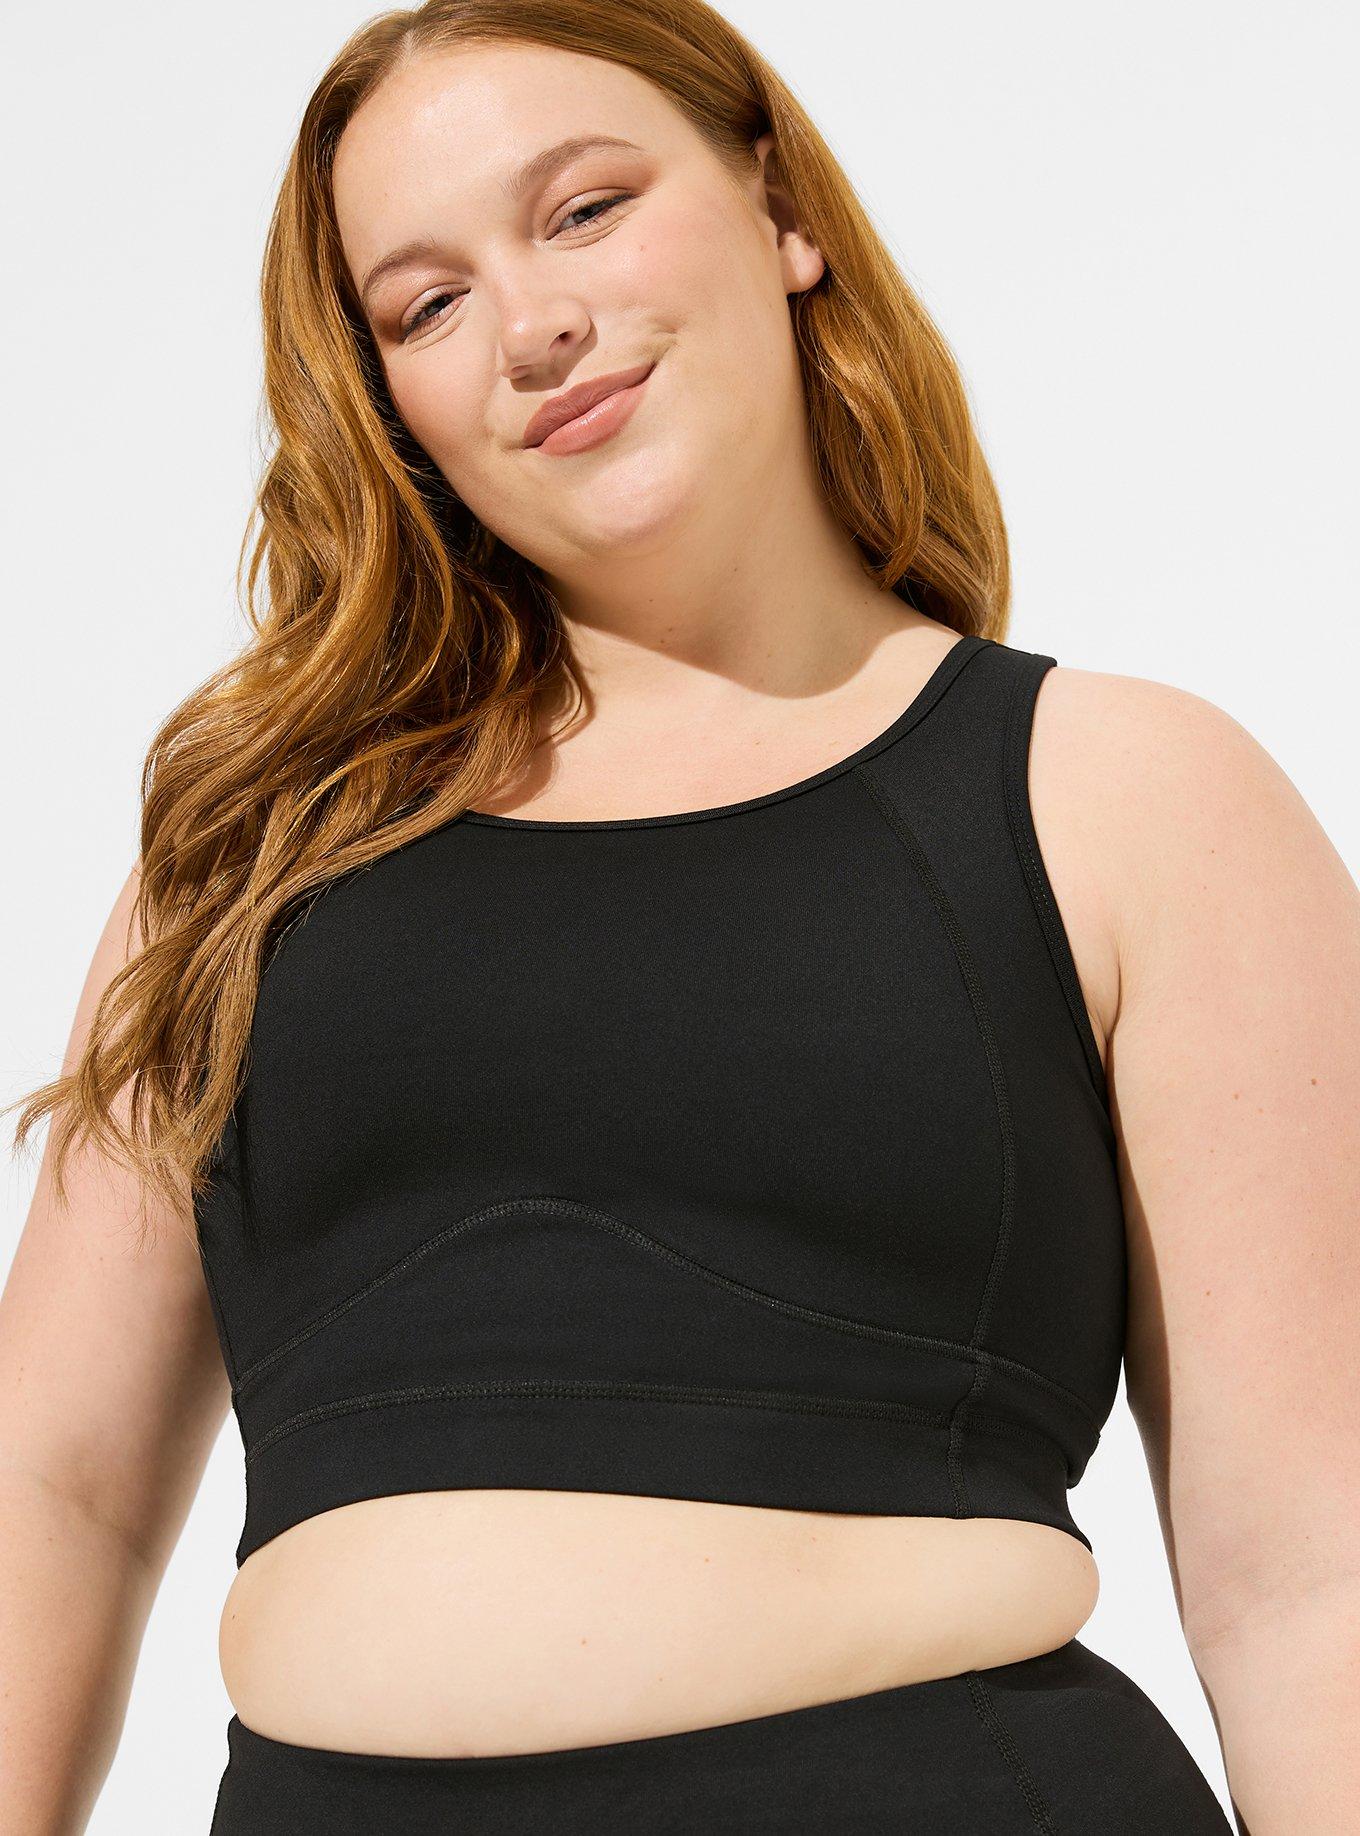 The Gym People, Intimates & Sleepwear, The Gym People Womens Longline Sports  Bra Wirefree Support